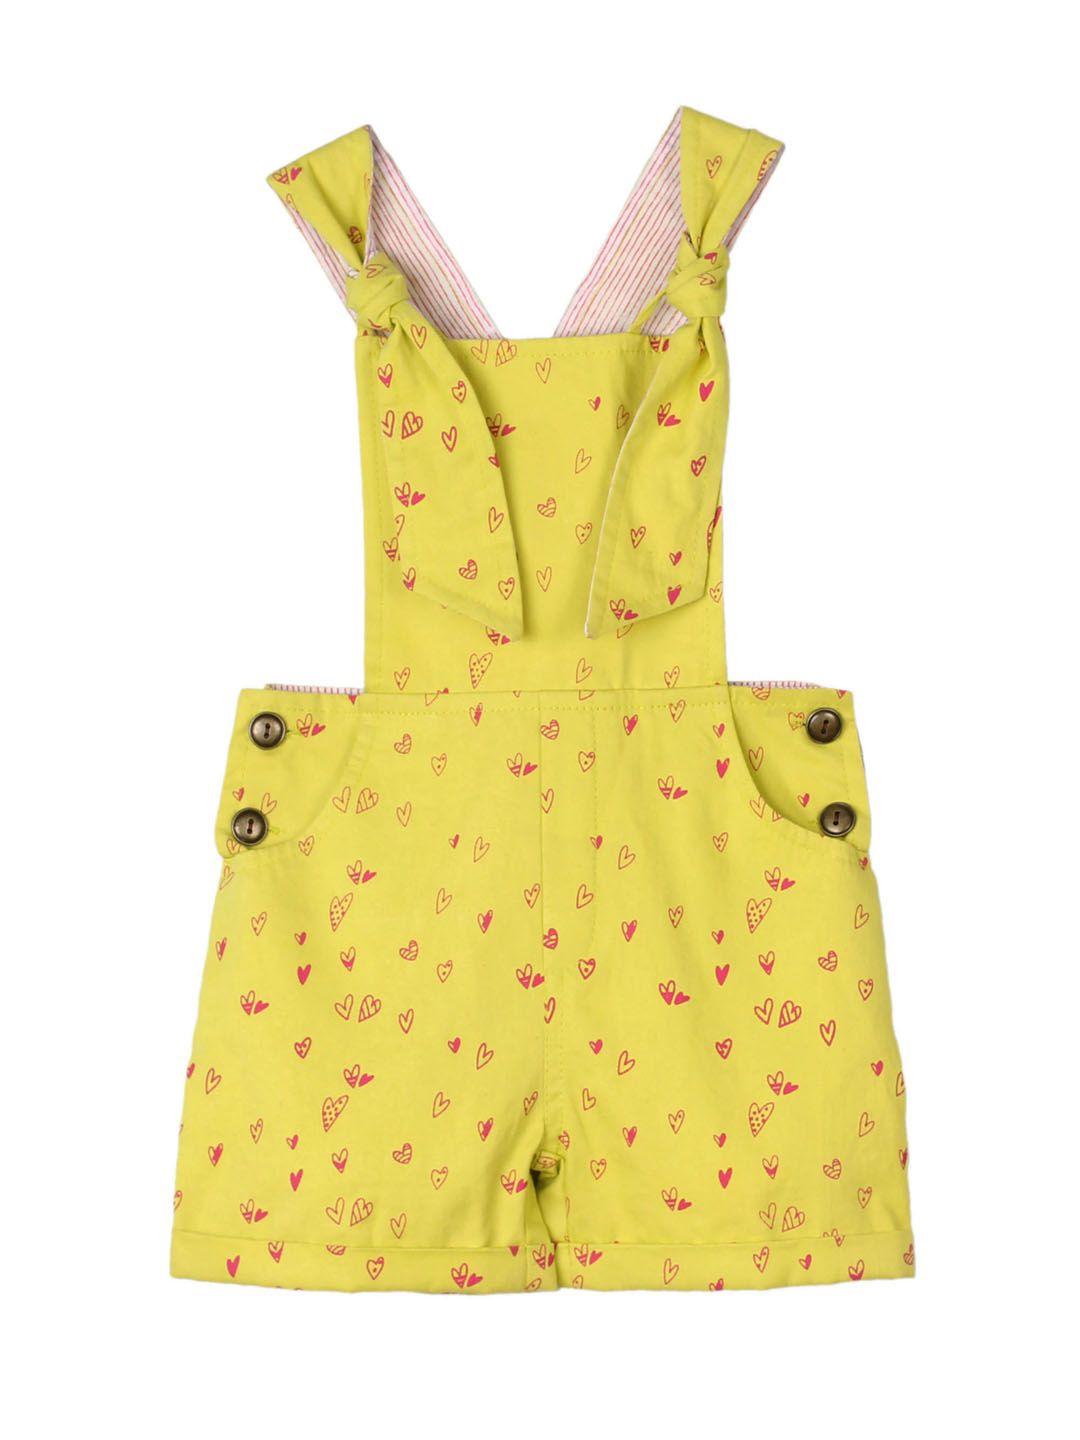 my-little-lambs-unisex-lime-green-printed-dungarees